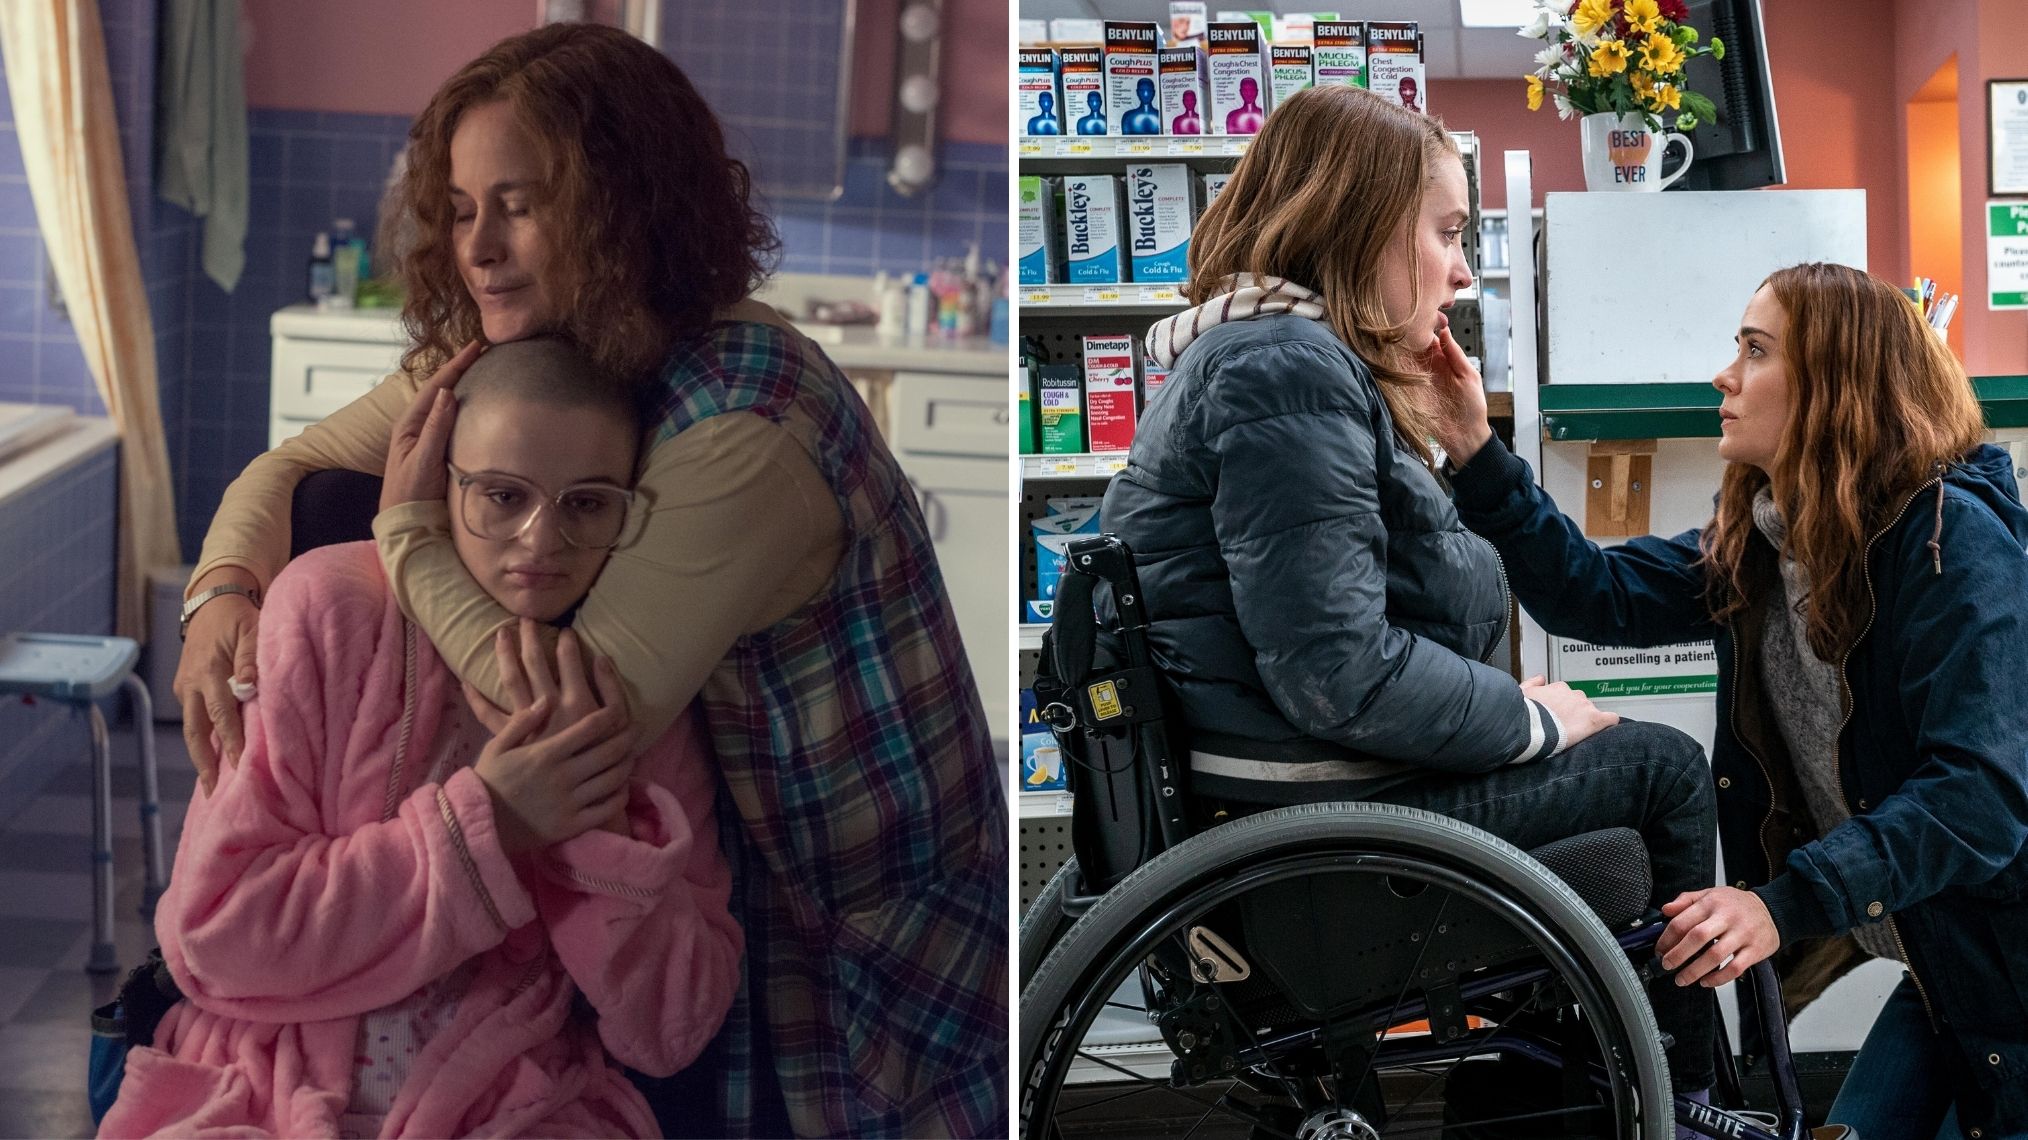 The Act': The TV Characters vs. Their Real-Life Counterparts (PHOTOS)